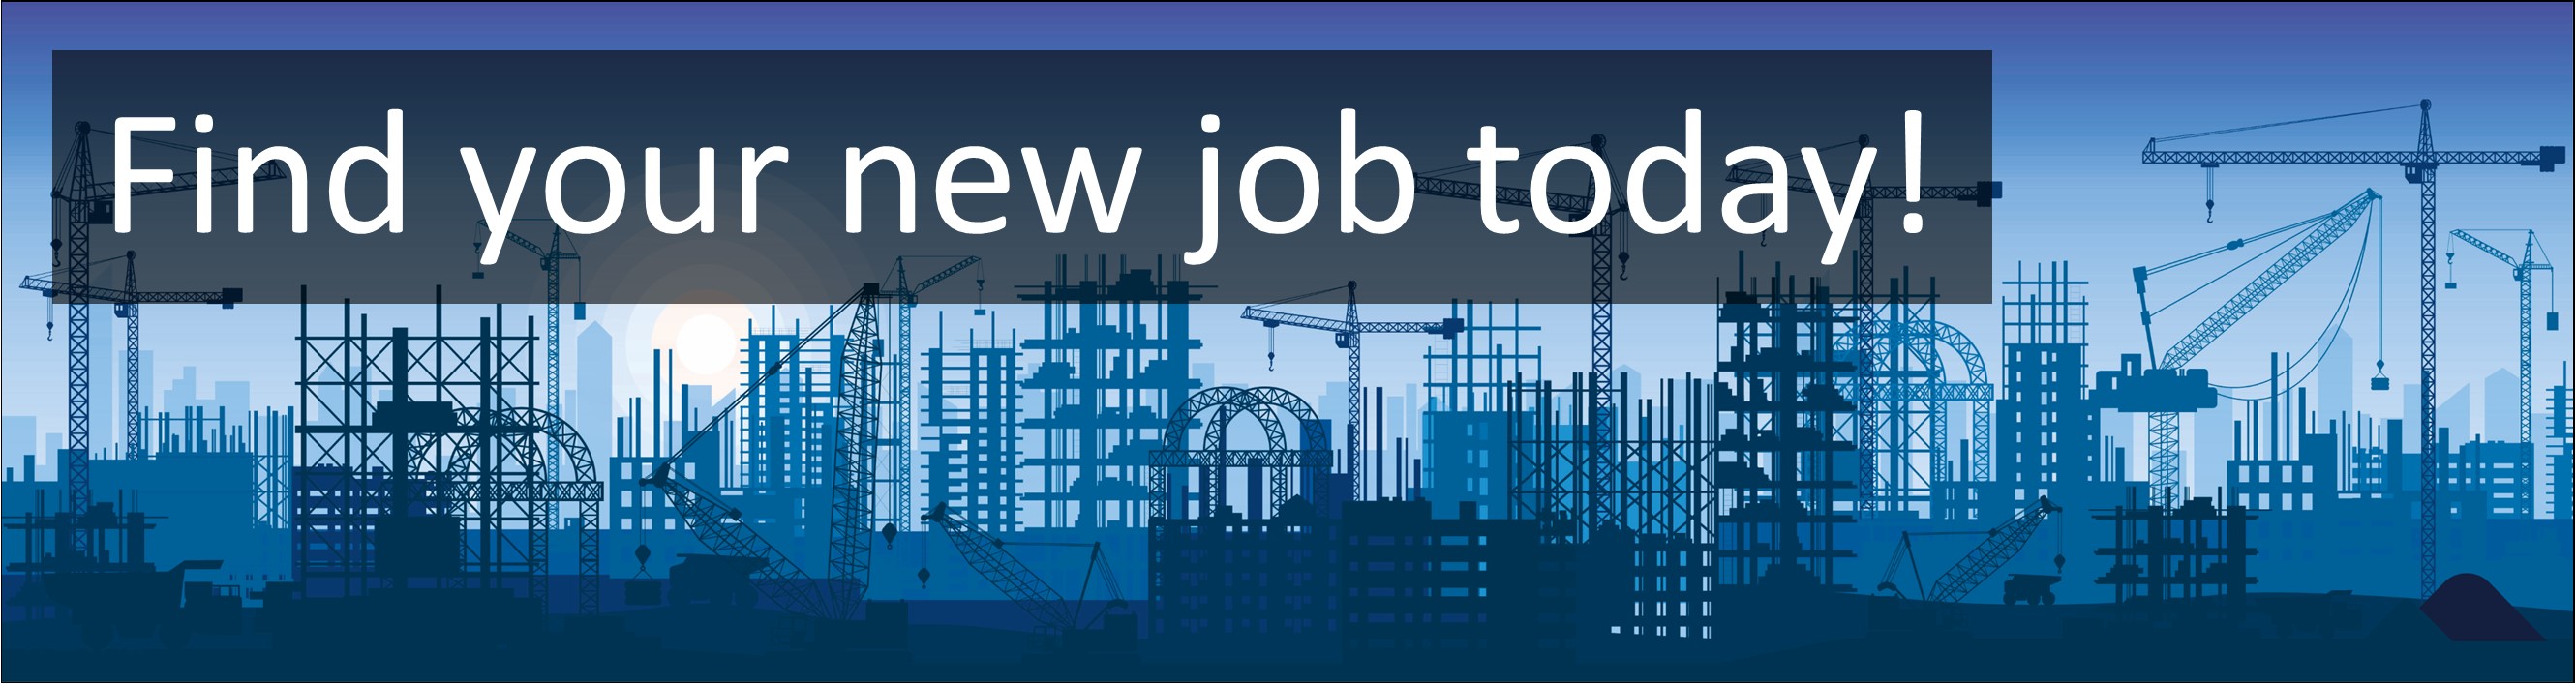 Construction & Trades Jobs. Manufacturing Plant Site Operative Jobs, Careers & Vacancies in Avonmouth, Bristol, South West England Advertised by AWD online – Multi-Job Board Advertising and CV Sourcing Recruitment Services